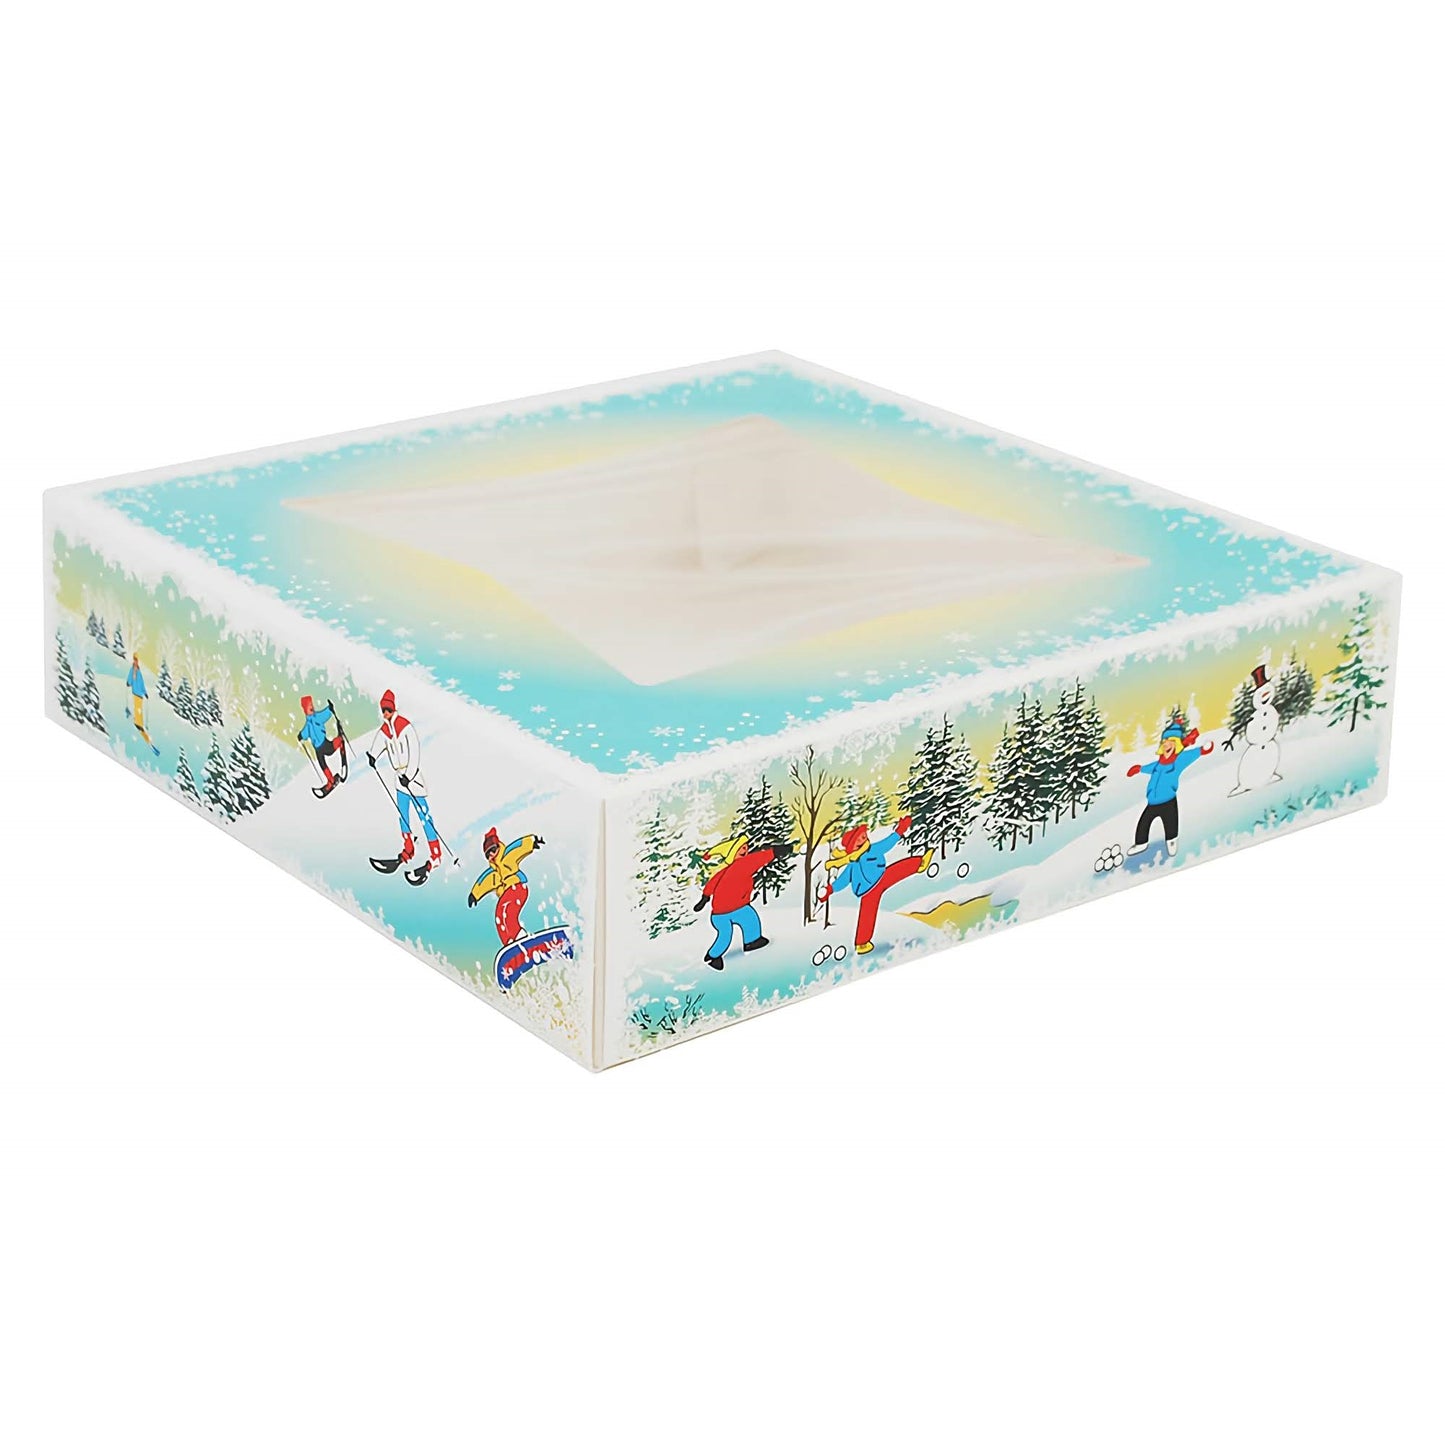 This image features a large Winter Wonderland candy box with a transparent window on the top. The sides of the box are adorned with a festive winter scene that includes people engaging in activities such as skiing and walking dogs, against a backdrop of snow-covered trees and falling snowflakes. The design evokes a cheerful holiday spirit and a sense of snowy adventure.